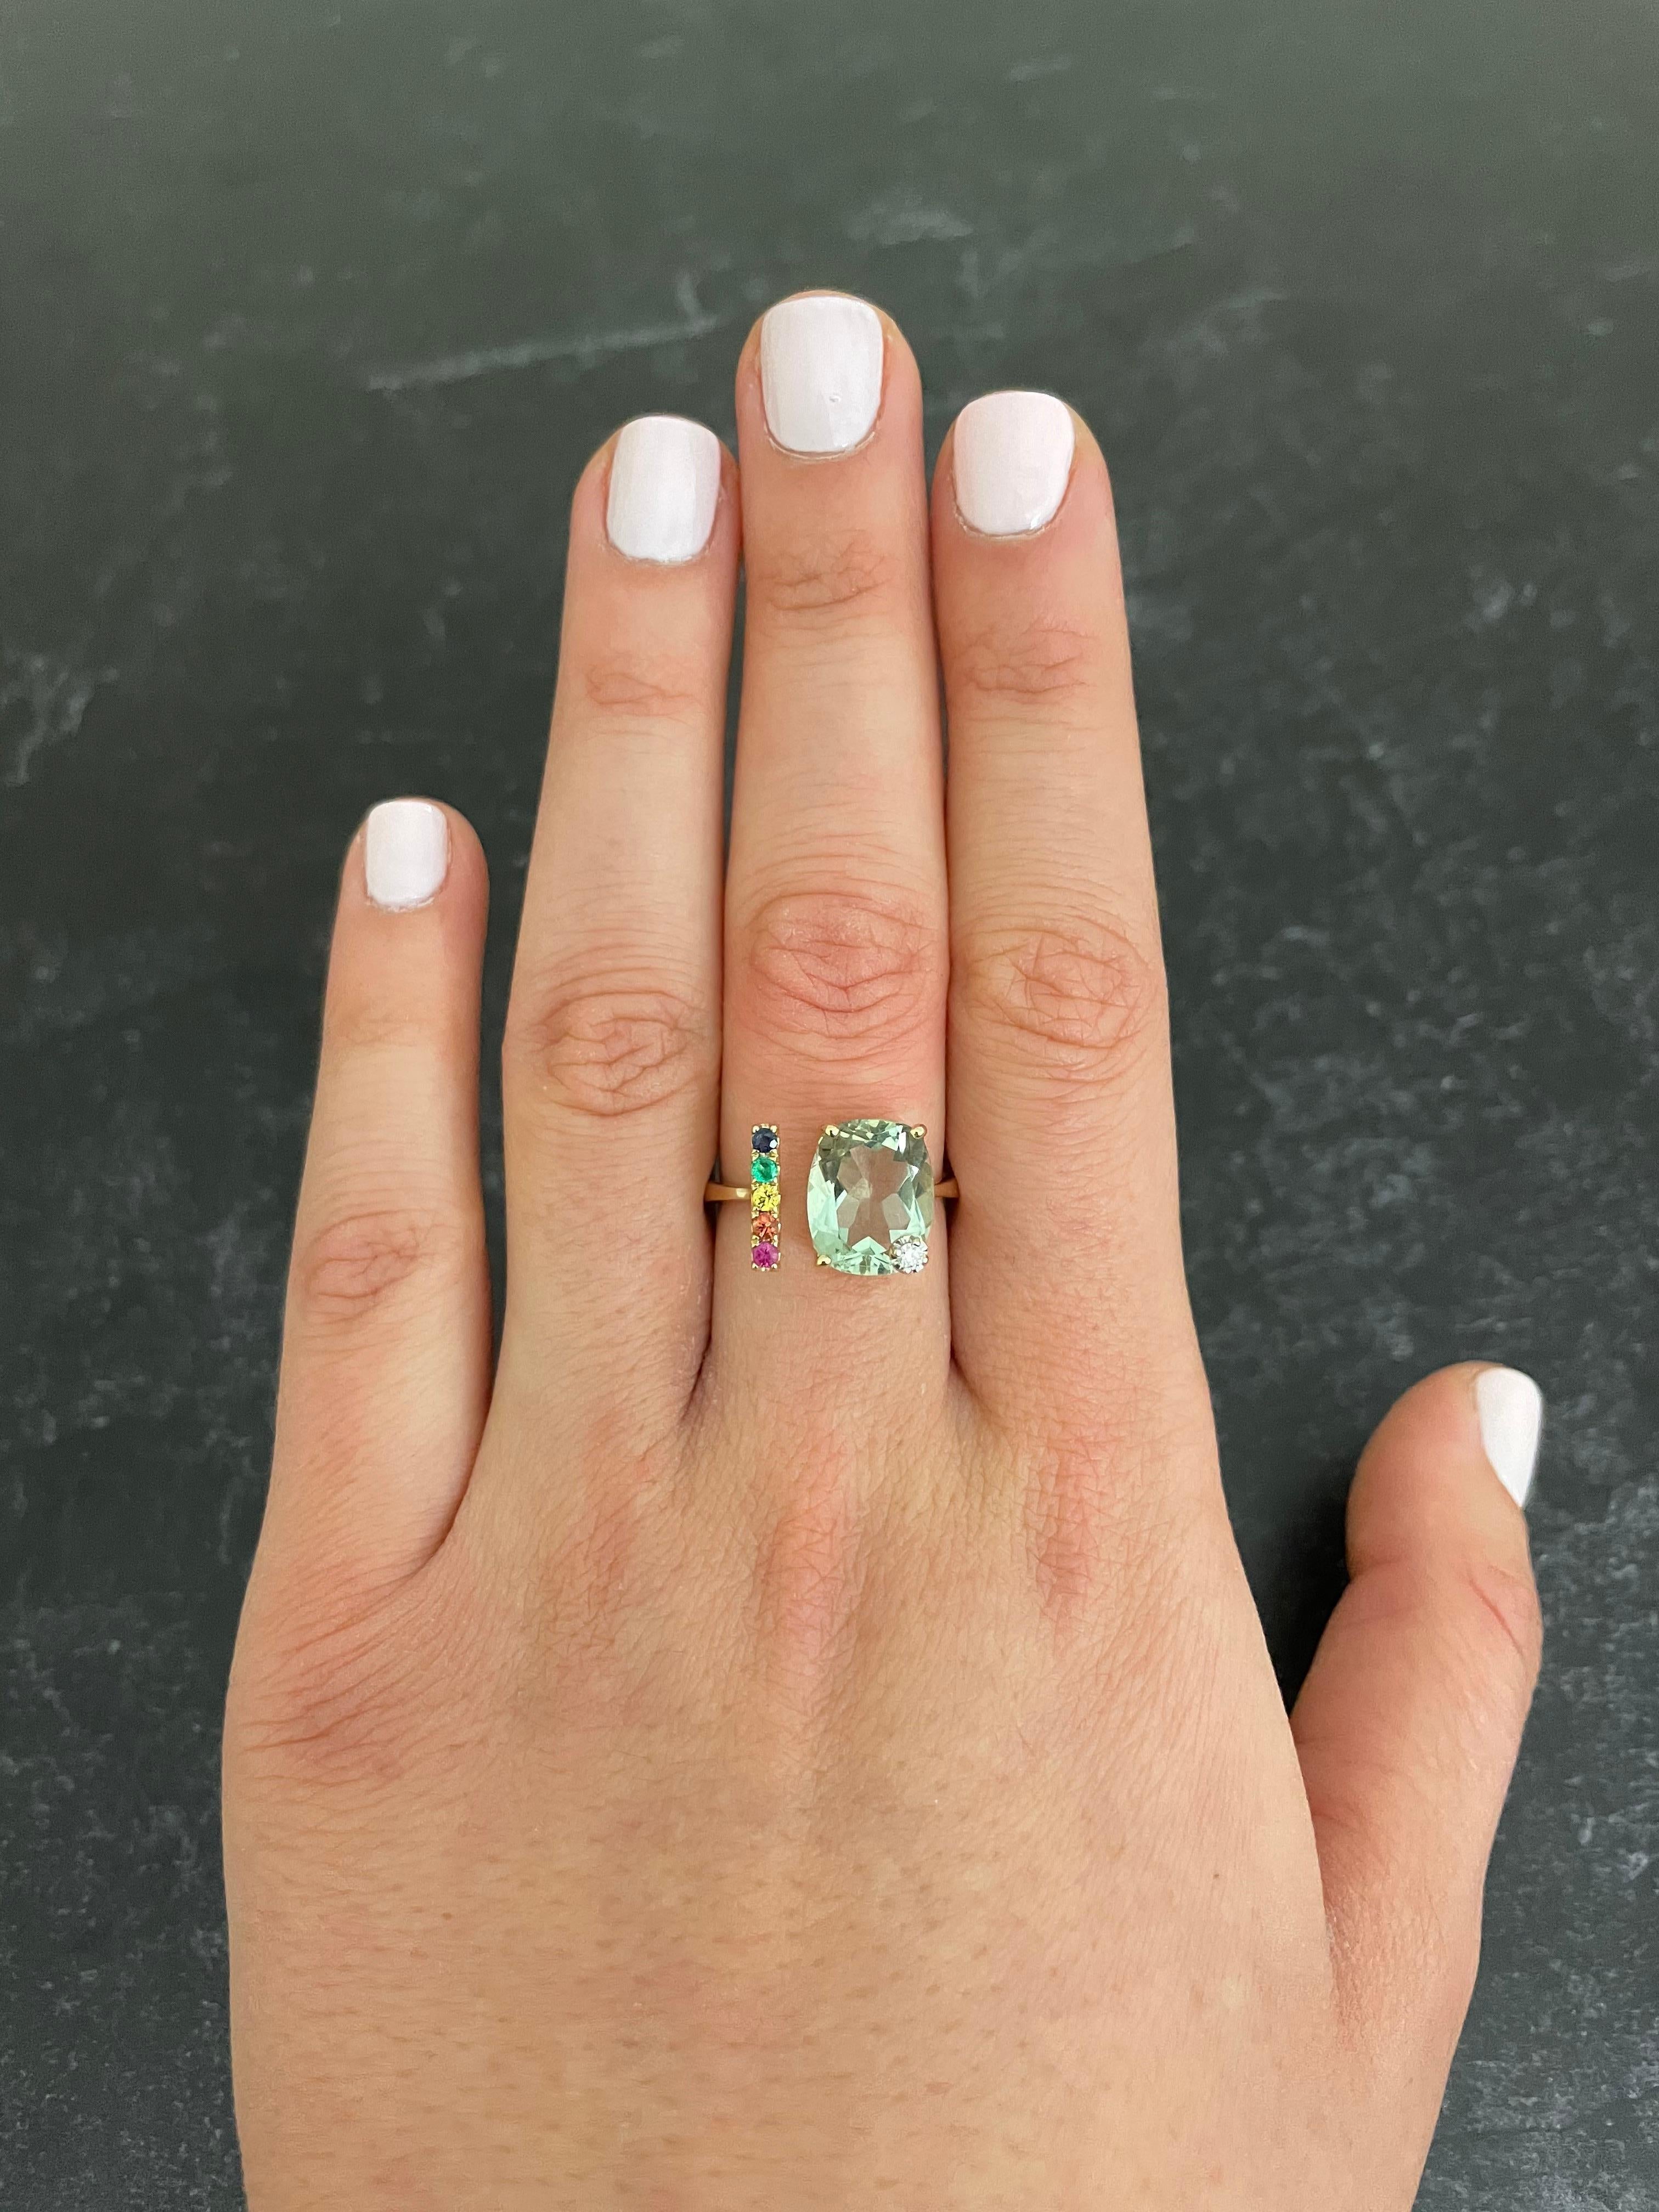 Material: 14k Yellow Gold 
Center Stone Details: 1 Cushion Cut Green Amethyst at 3.50 Carats - Measuring 11 x 9 mm 
Mounting Stone Details: 5 Multicolor Sapphires at 0.30 Carats
Diamond Details: 1 Brilliant Round White Diamond at Approximately 0.03